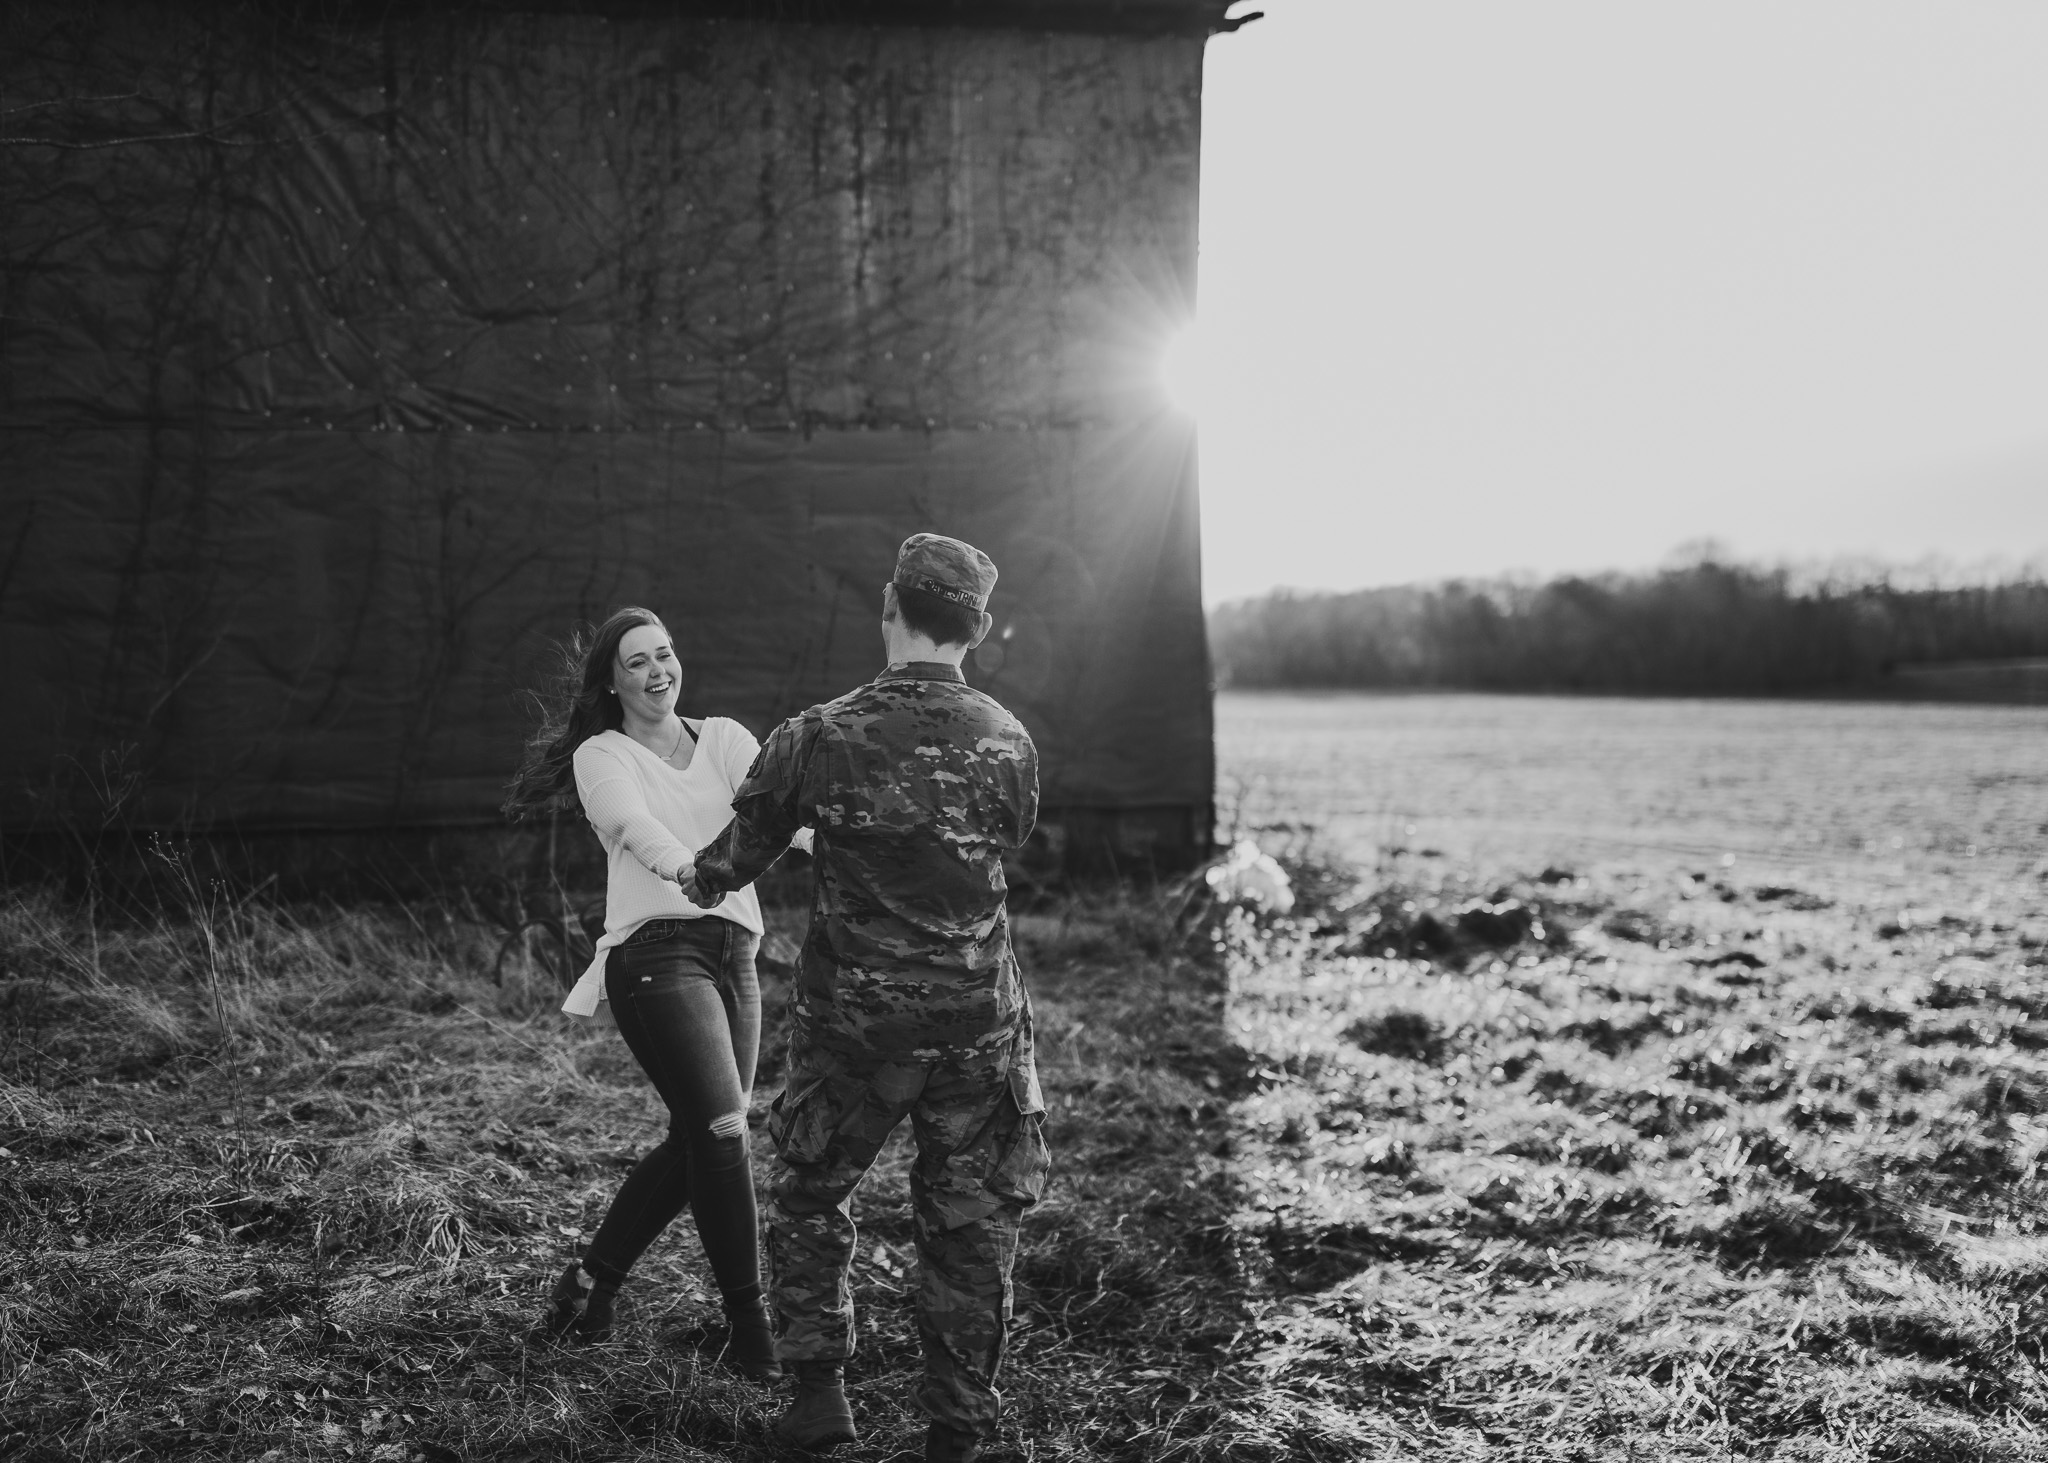 couple twirling in black and white and army uniform